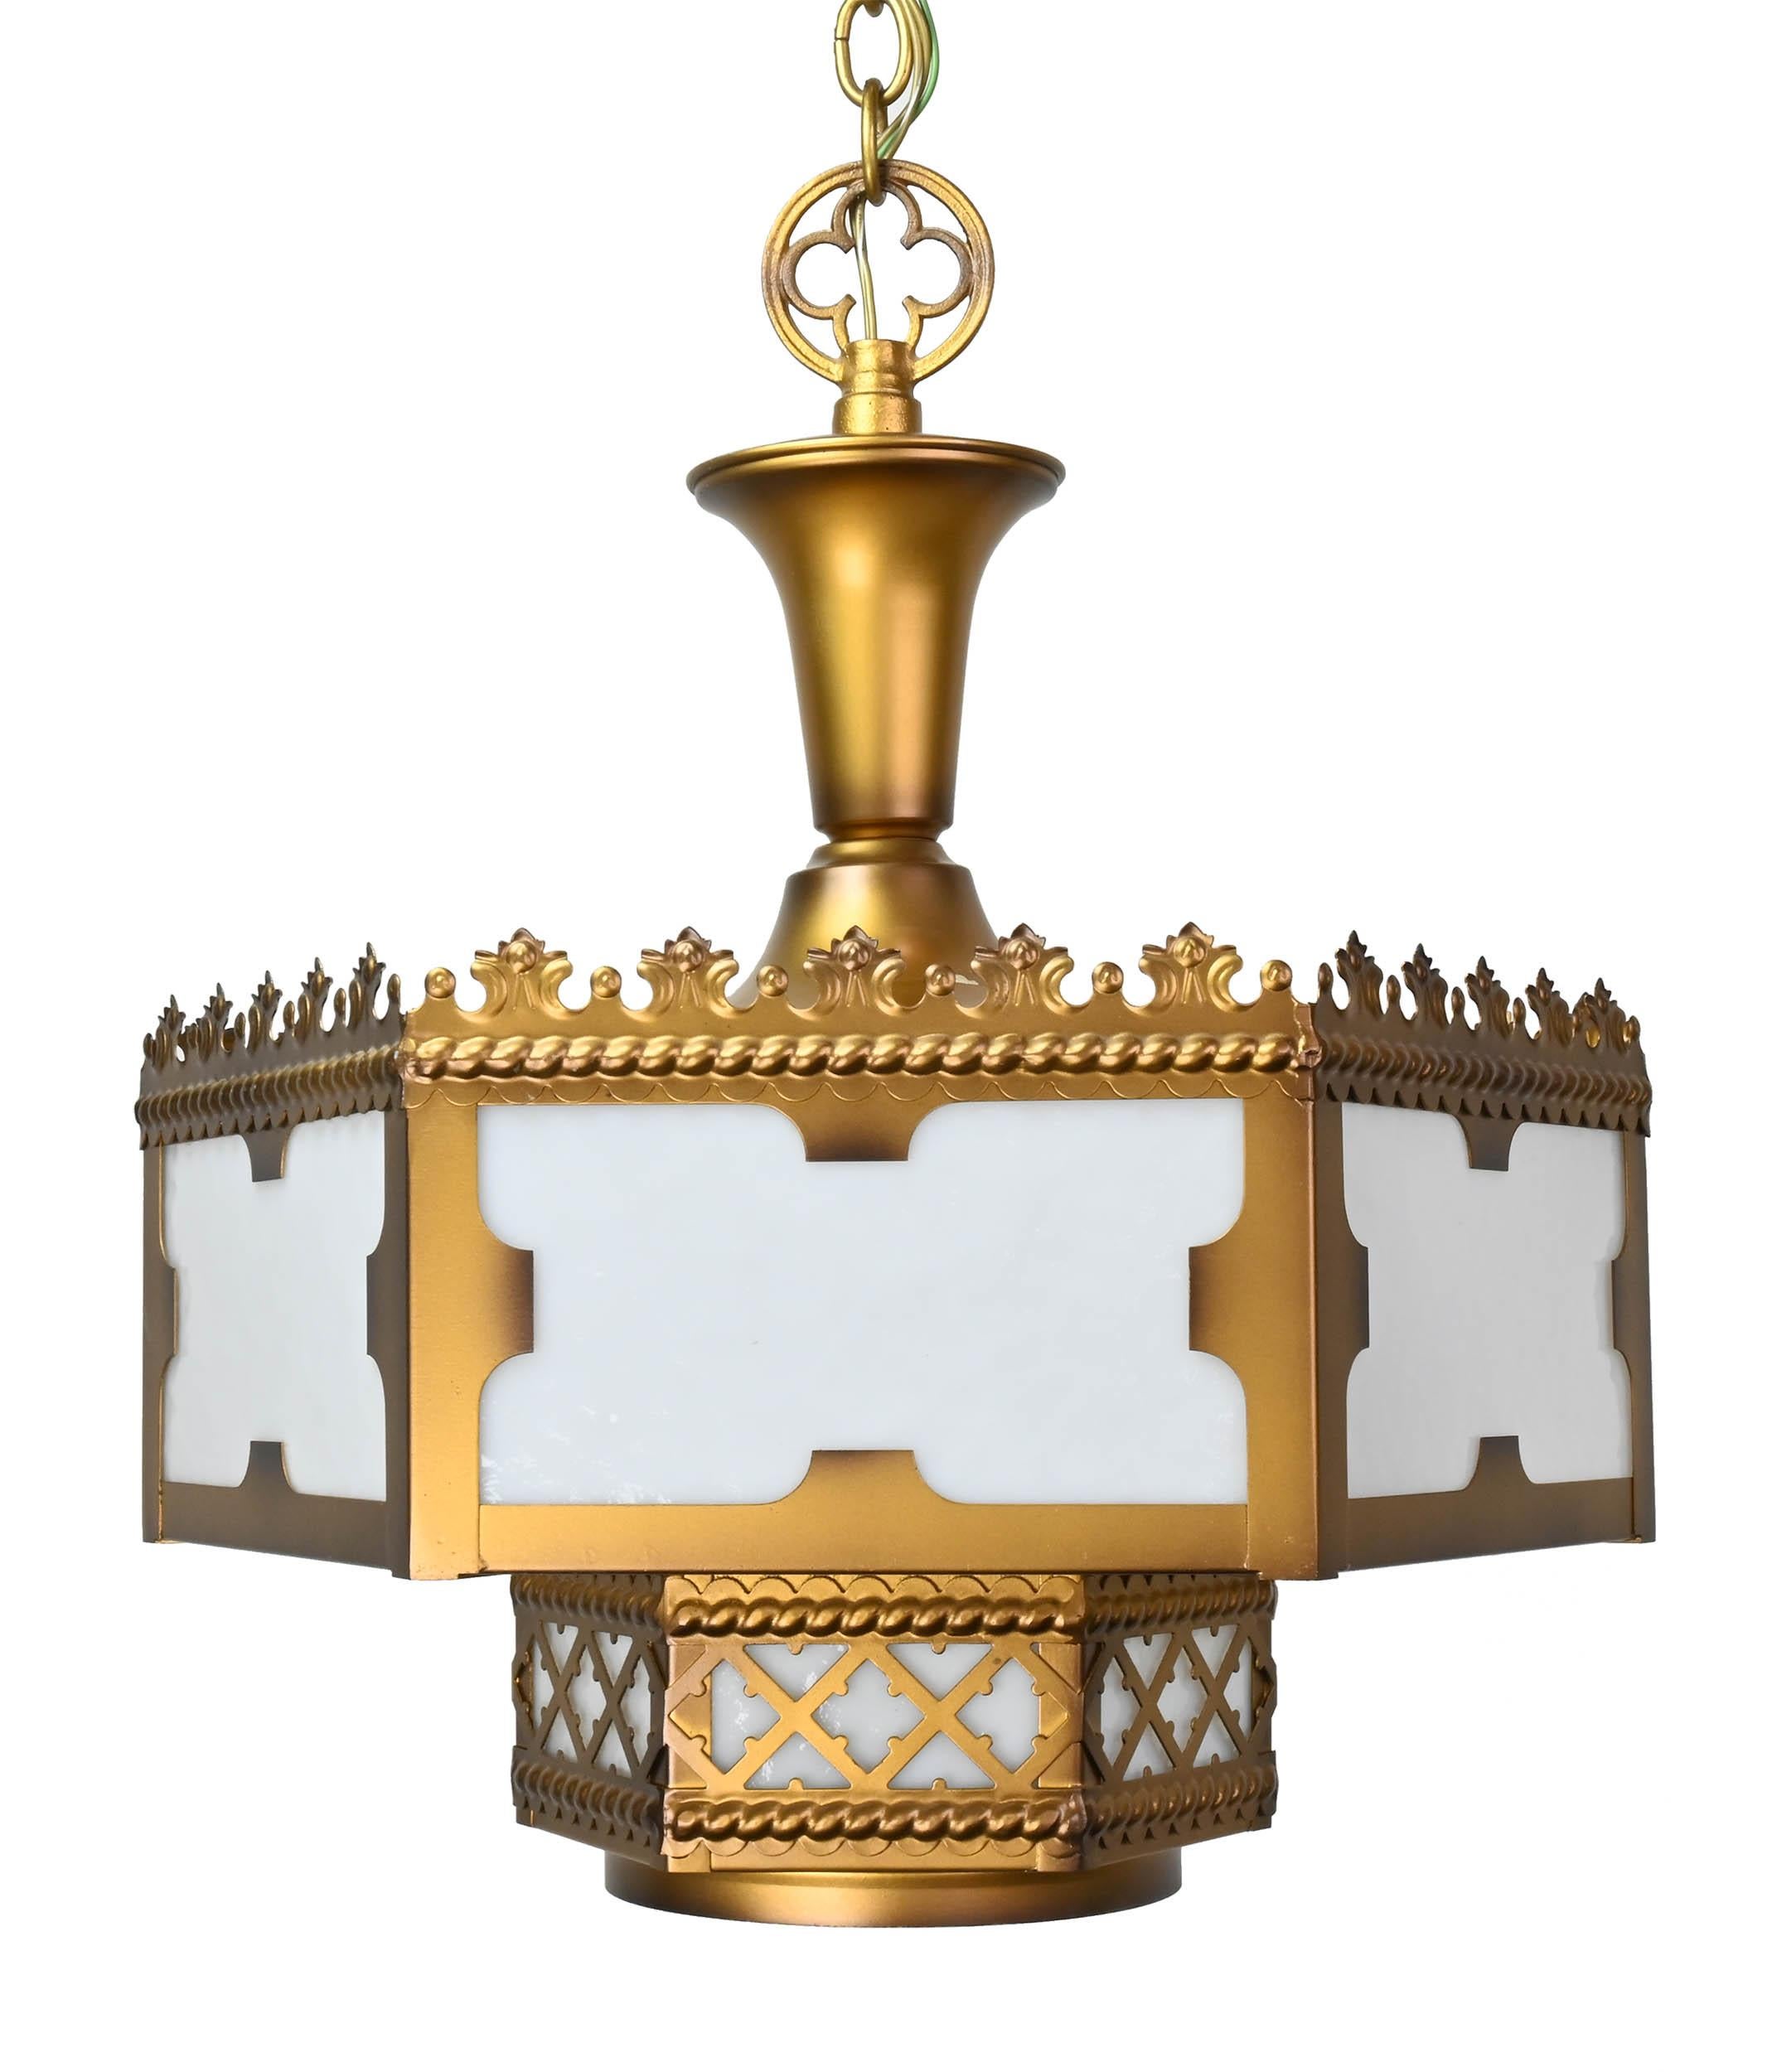 Salvaged from Mt Olive Evangelical Lutheran Church in Graceville, MN, Circa 1940s
Condition: Age Consistent
Material: Painted brass and plexiglas
Finish: Original
Country of origin: USA
Illumination: 5 Standard Edison Bulbs 

Fixture